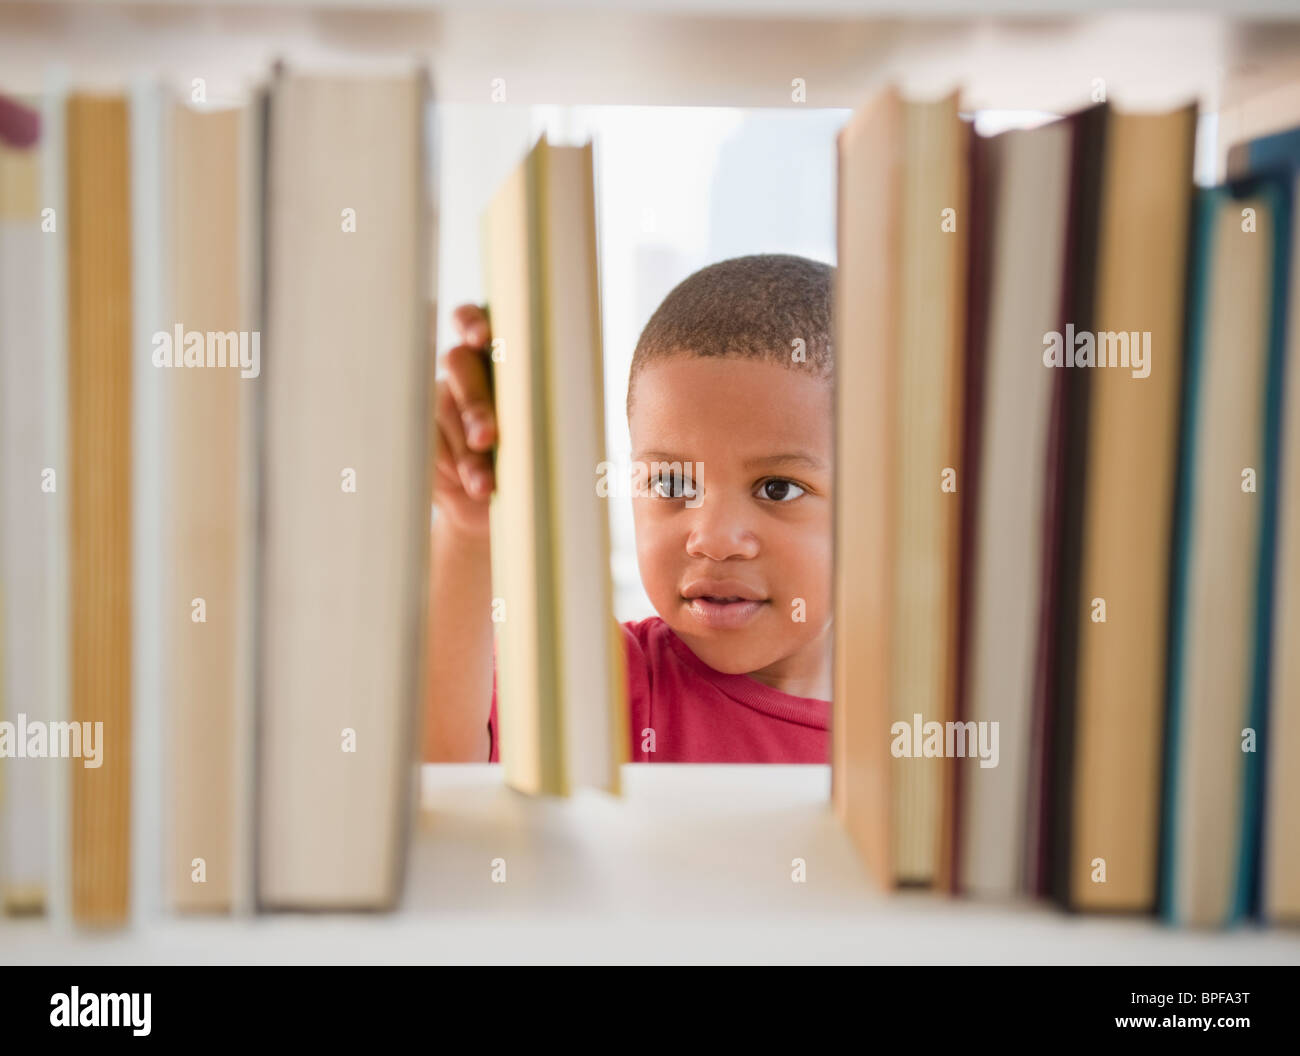 African American boy selecting book Stock Photo